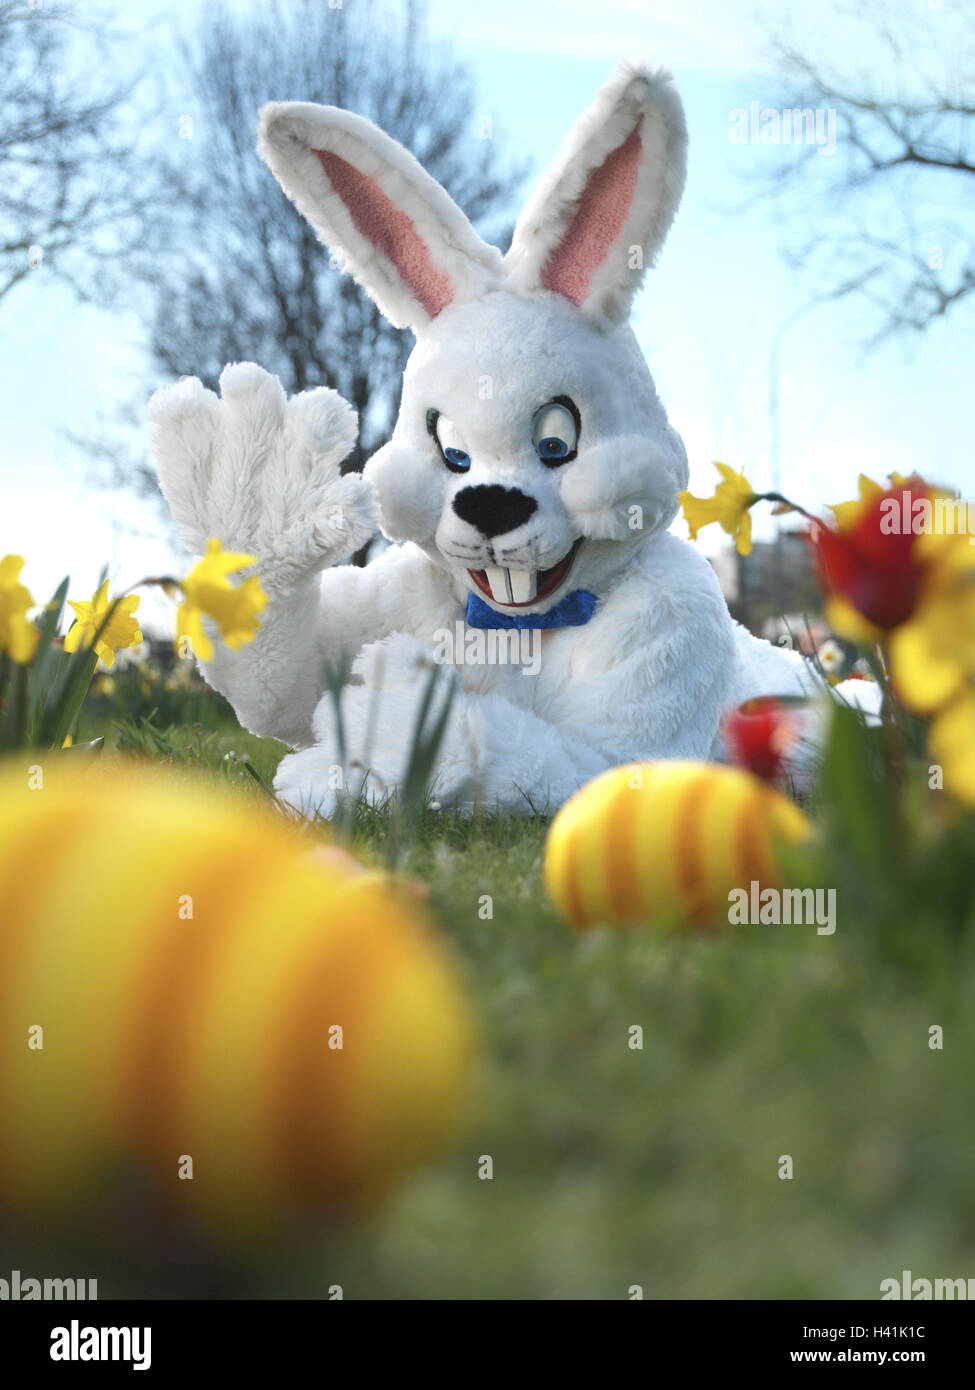 Meadow, Easter bunny, waves,  Easter eggs, portrait, fuzziness  Series, flower meadow, flowers, daffodils, jonquils, Easter, Easter, child beliefs, disguise, disguises, outfit, hare outfit, hare, humor, fun, merrily, kindly, cheerfully, joy, Easter nest, Easter eggs, hides, seeks, finds, season, spring, spring, outside Stock Photo